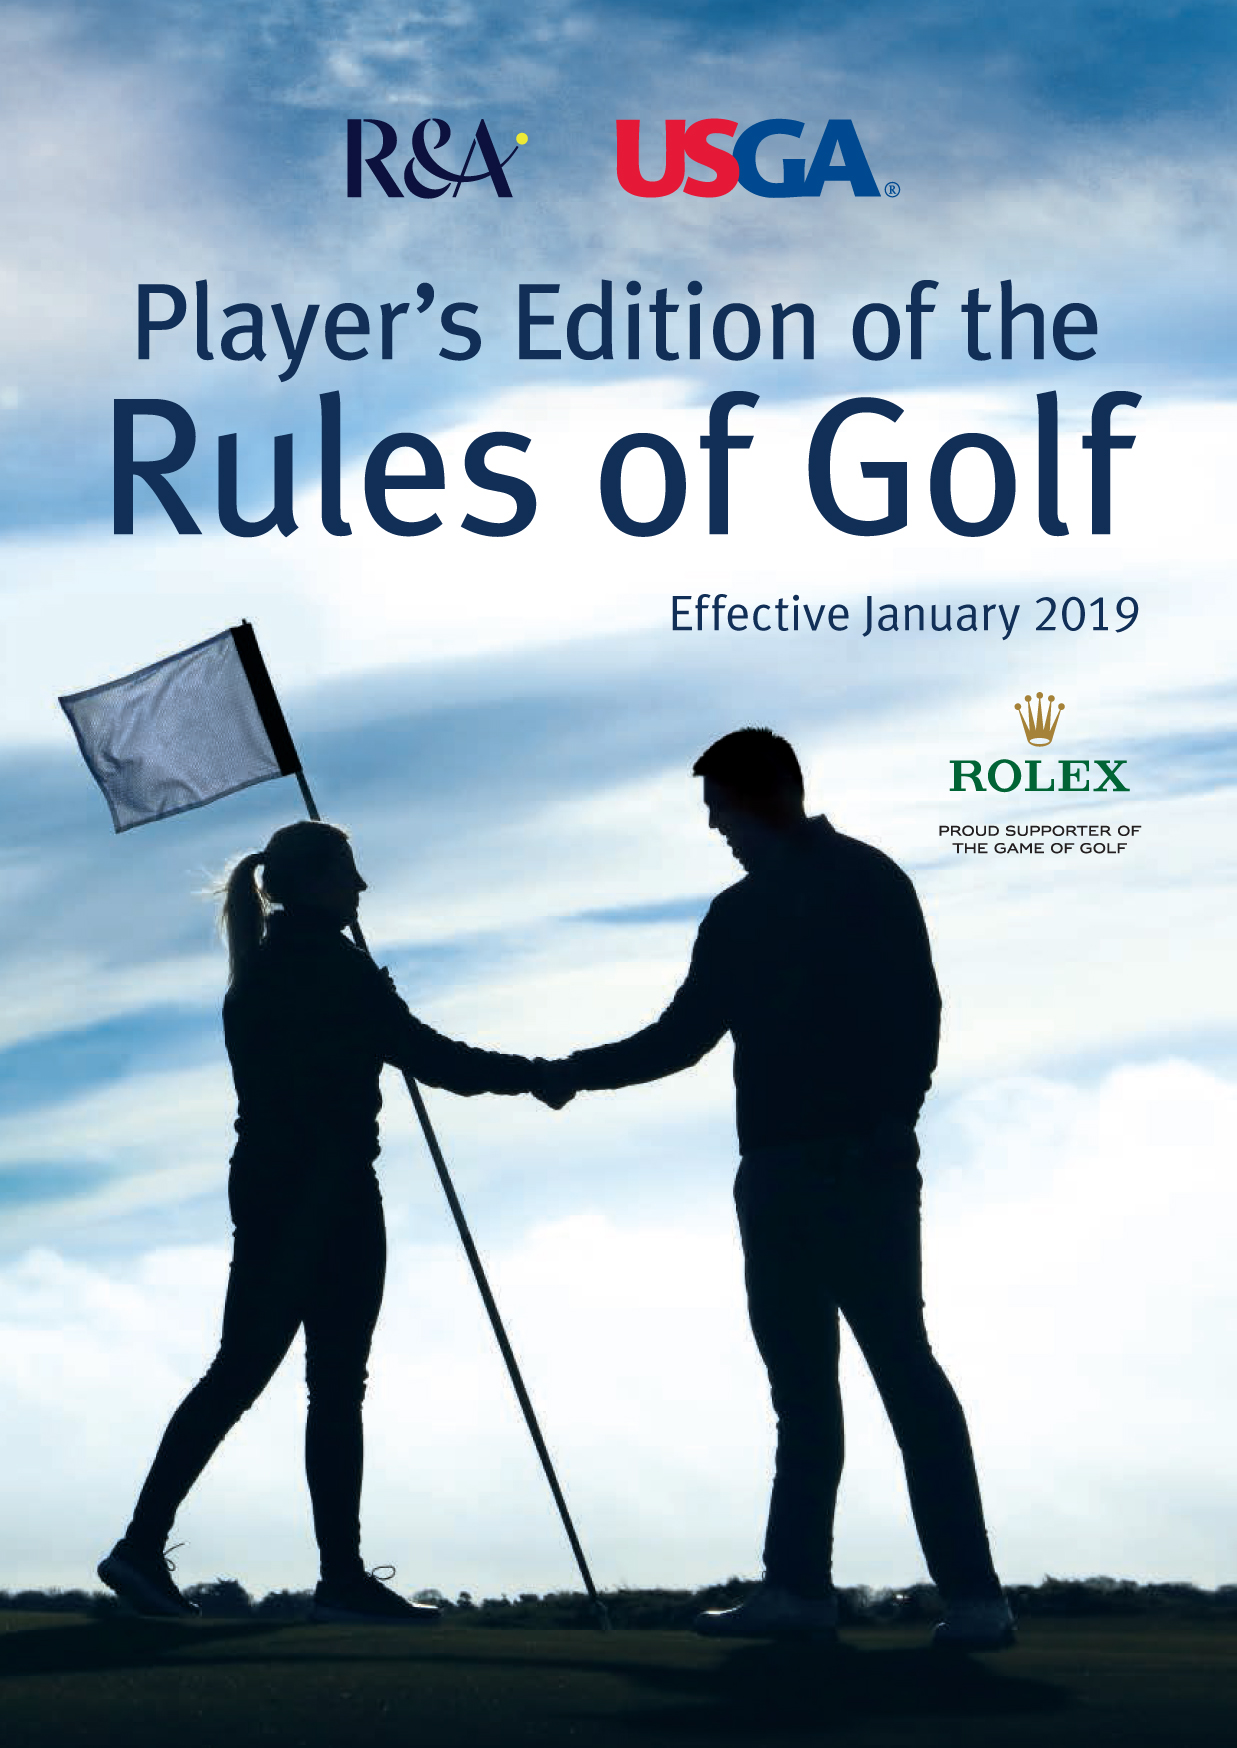 USGA Publishes Players' Edition of the Rules of Golf